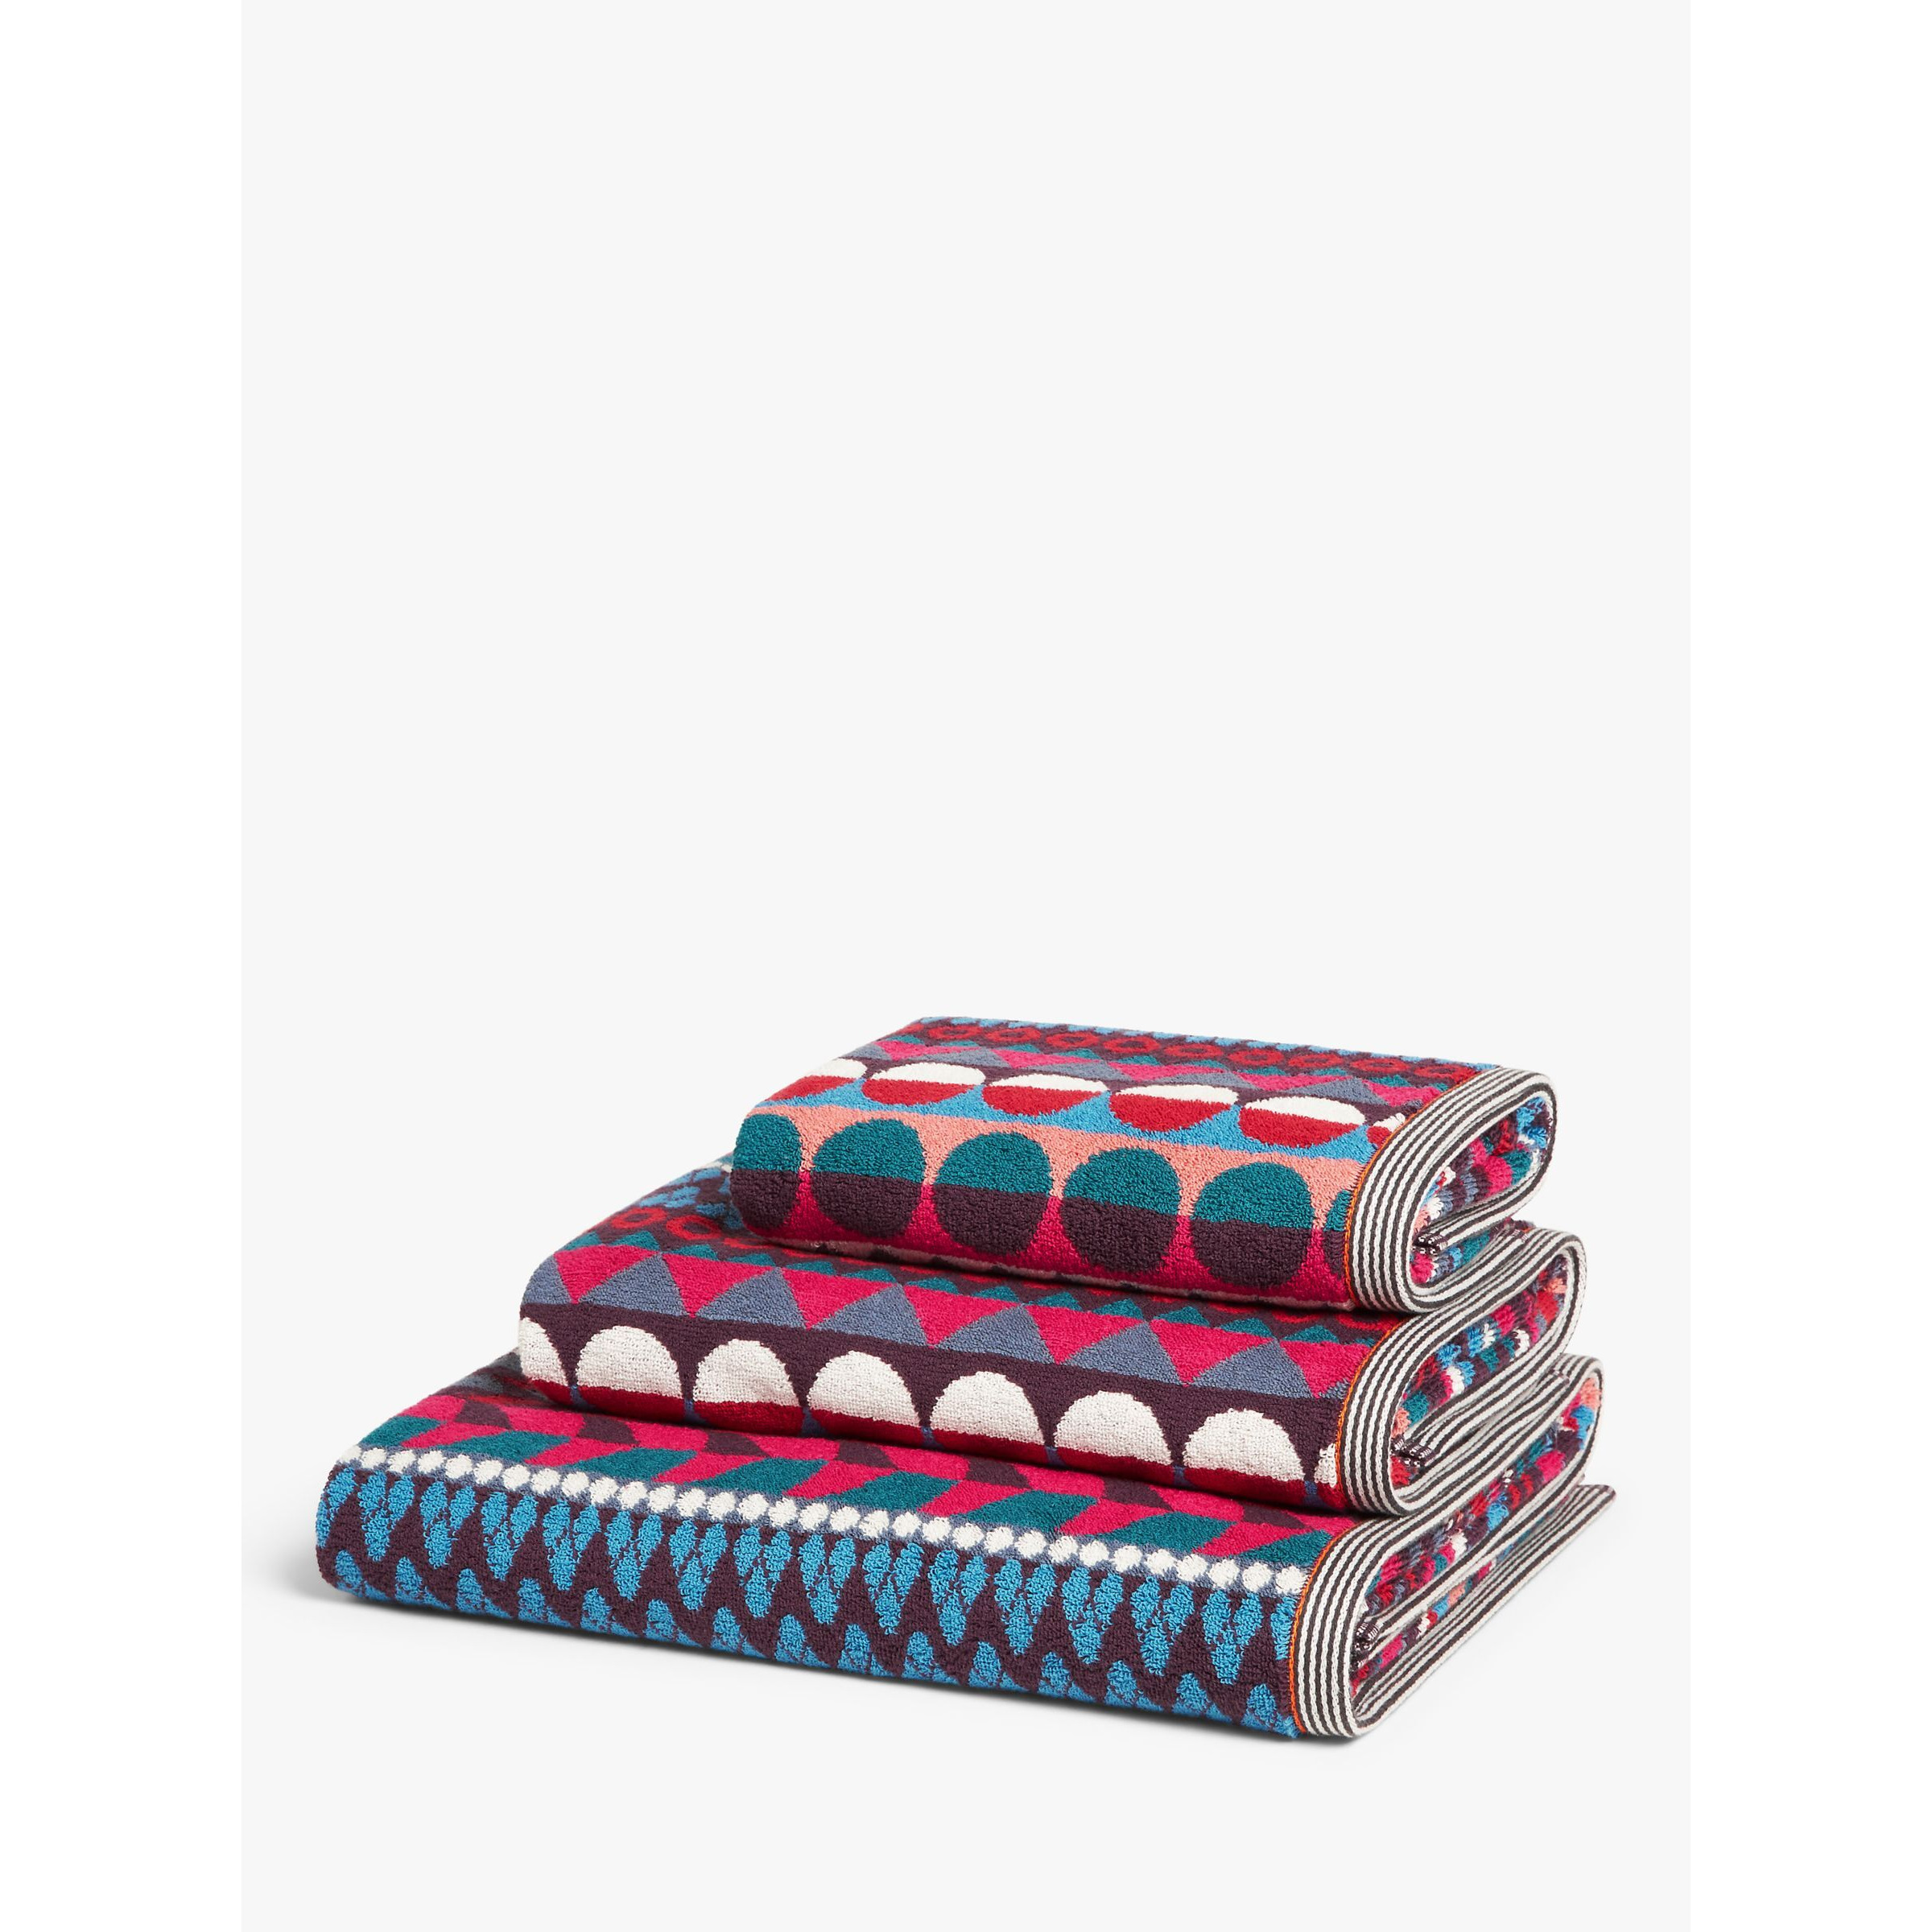 Margo Selby Kilburn Towels, Red/Multi - image 1